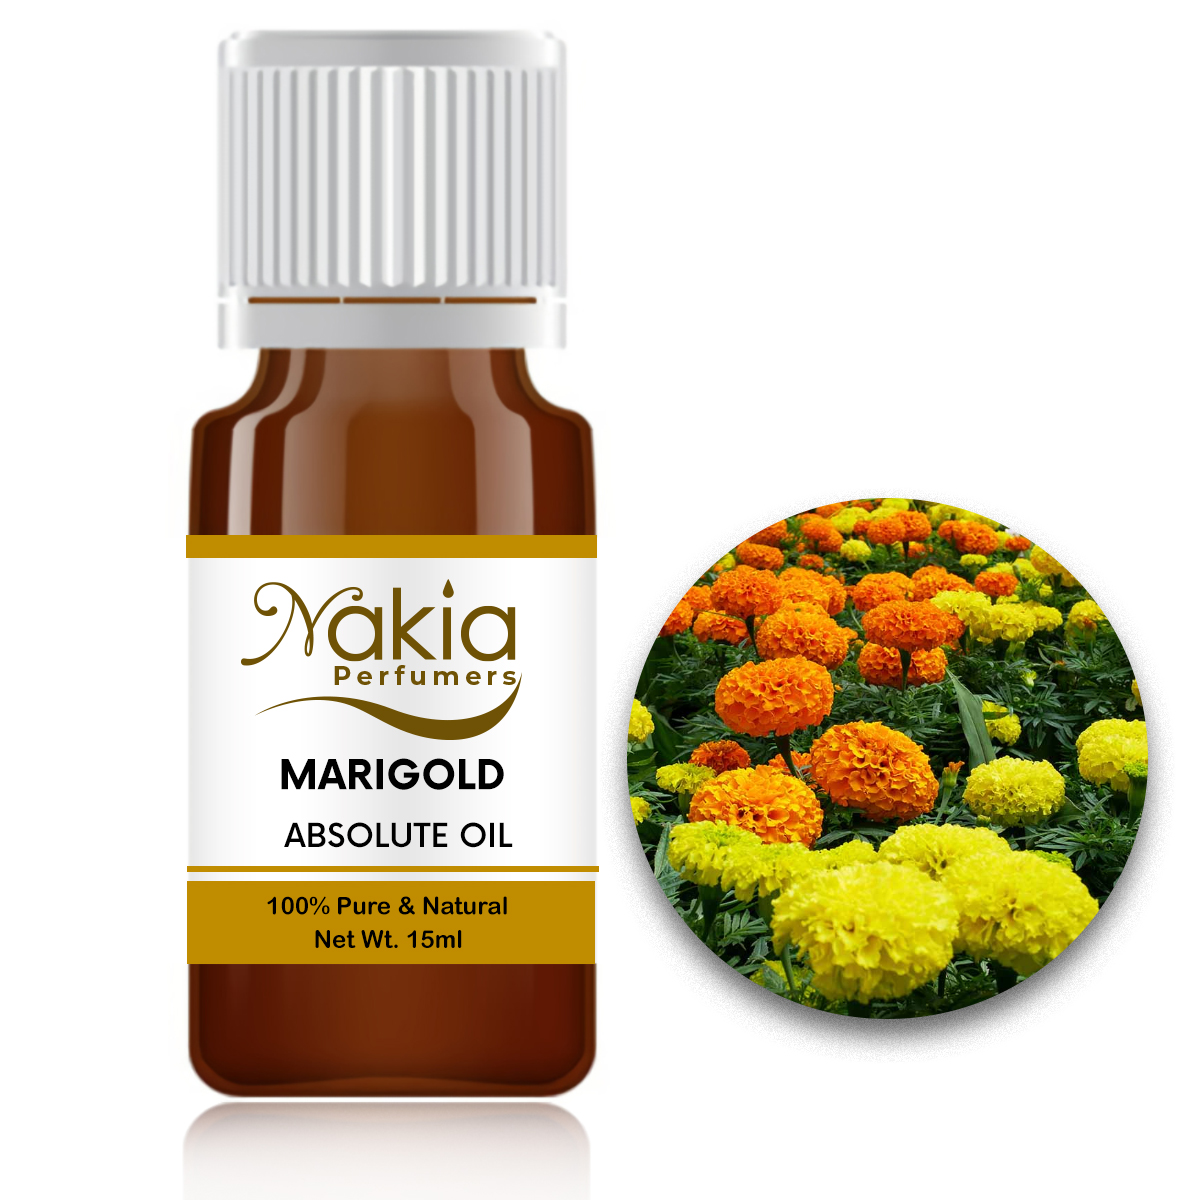 MARIGOLD ABSOLUTE OIL